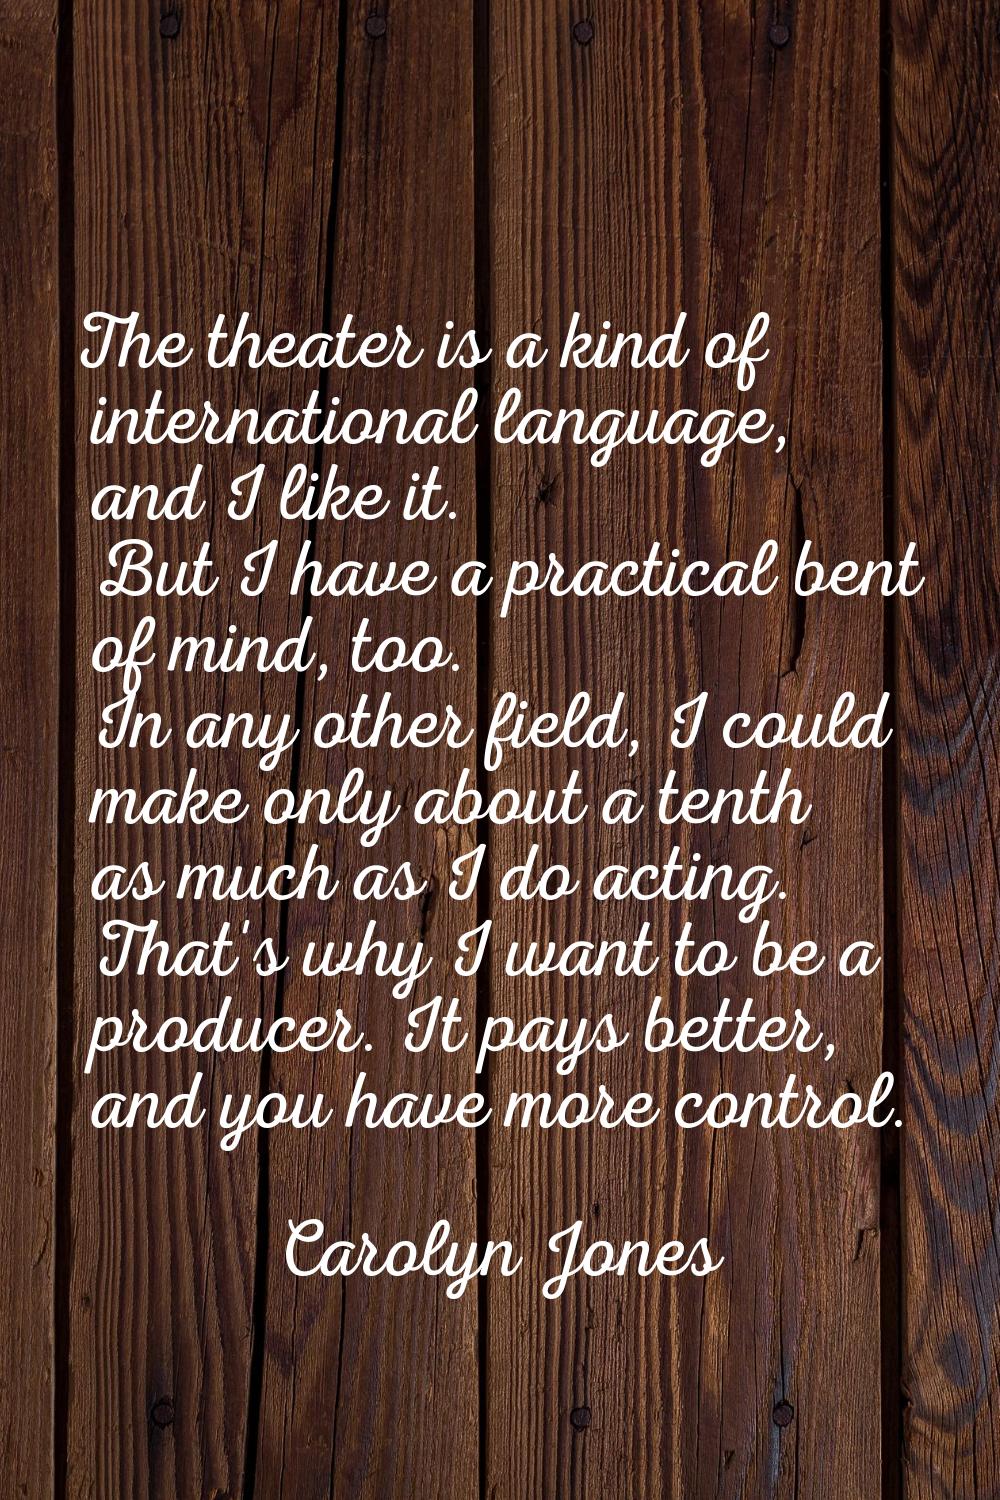 The theater is a kind of international language, and I like it. But I have a practical bent of mind